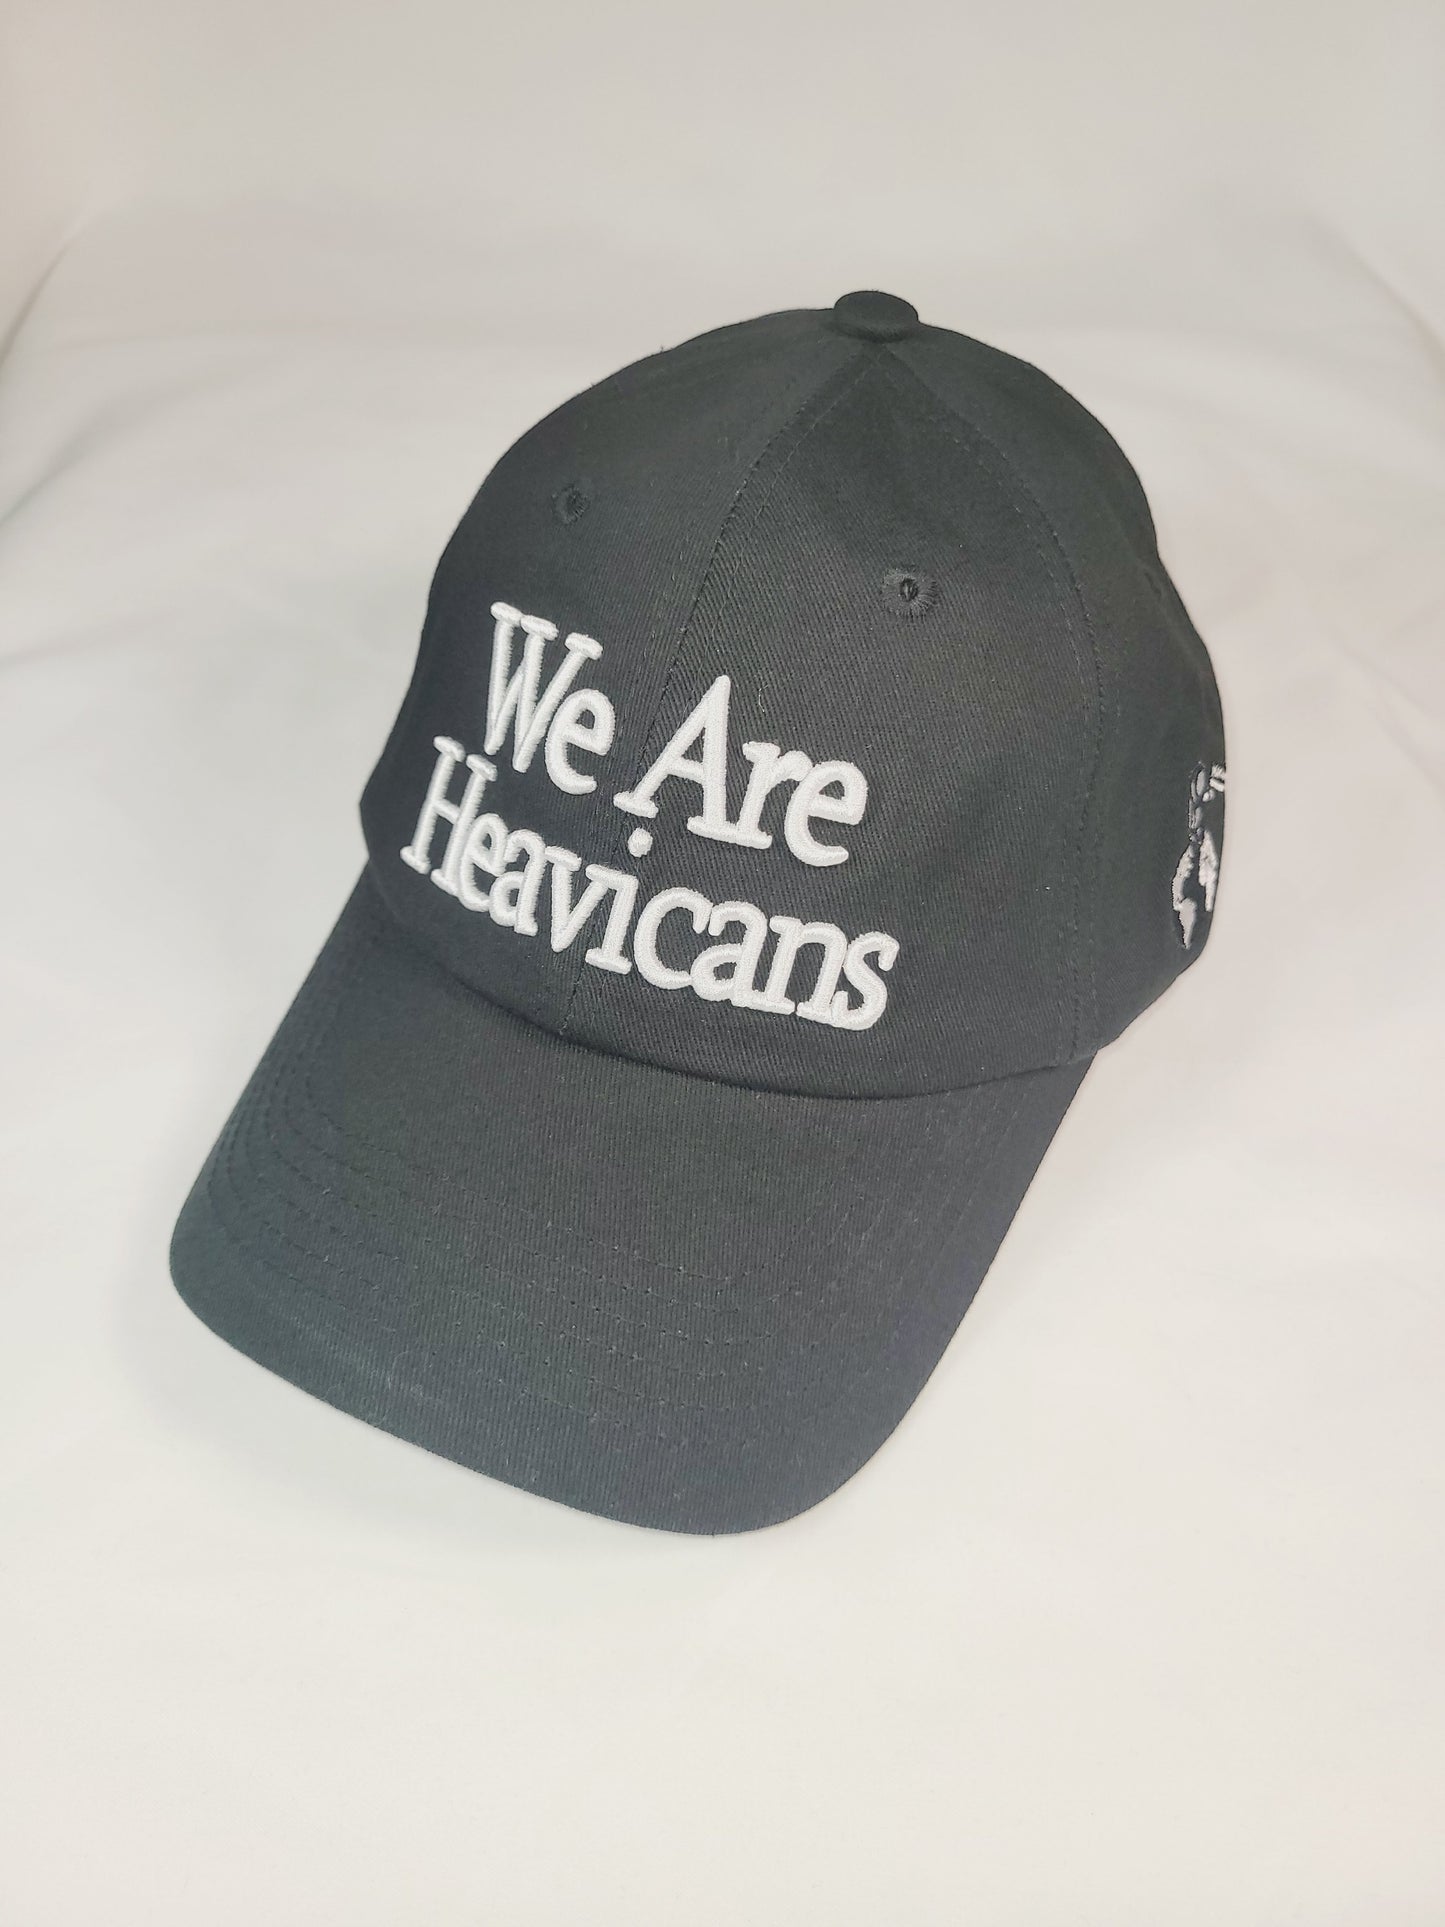 WE ARE HEAVICANS HAT